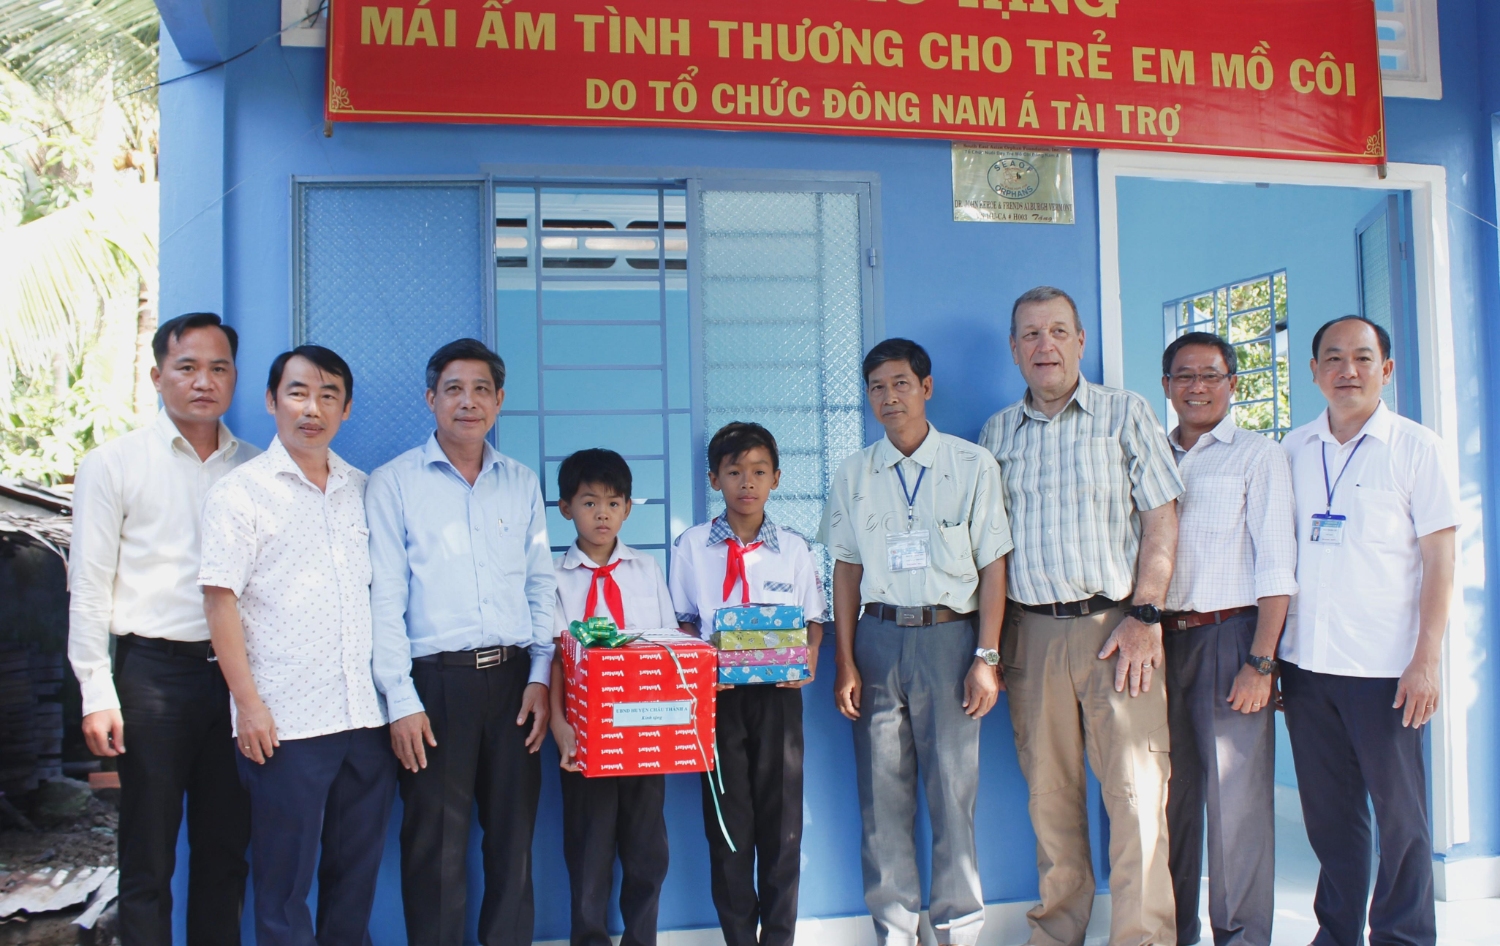 Mr. Dong Van Thanh - Vice Chairman of Hau Giang Provincial People's Committee (the third from the left) and Mr. John Michael Roberts - Executive Director of SEAOF (3rd, right) grant home for Nguyen Lam Tuong in Chau Thanh A district.